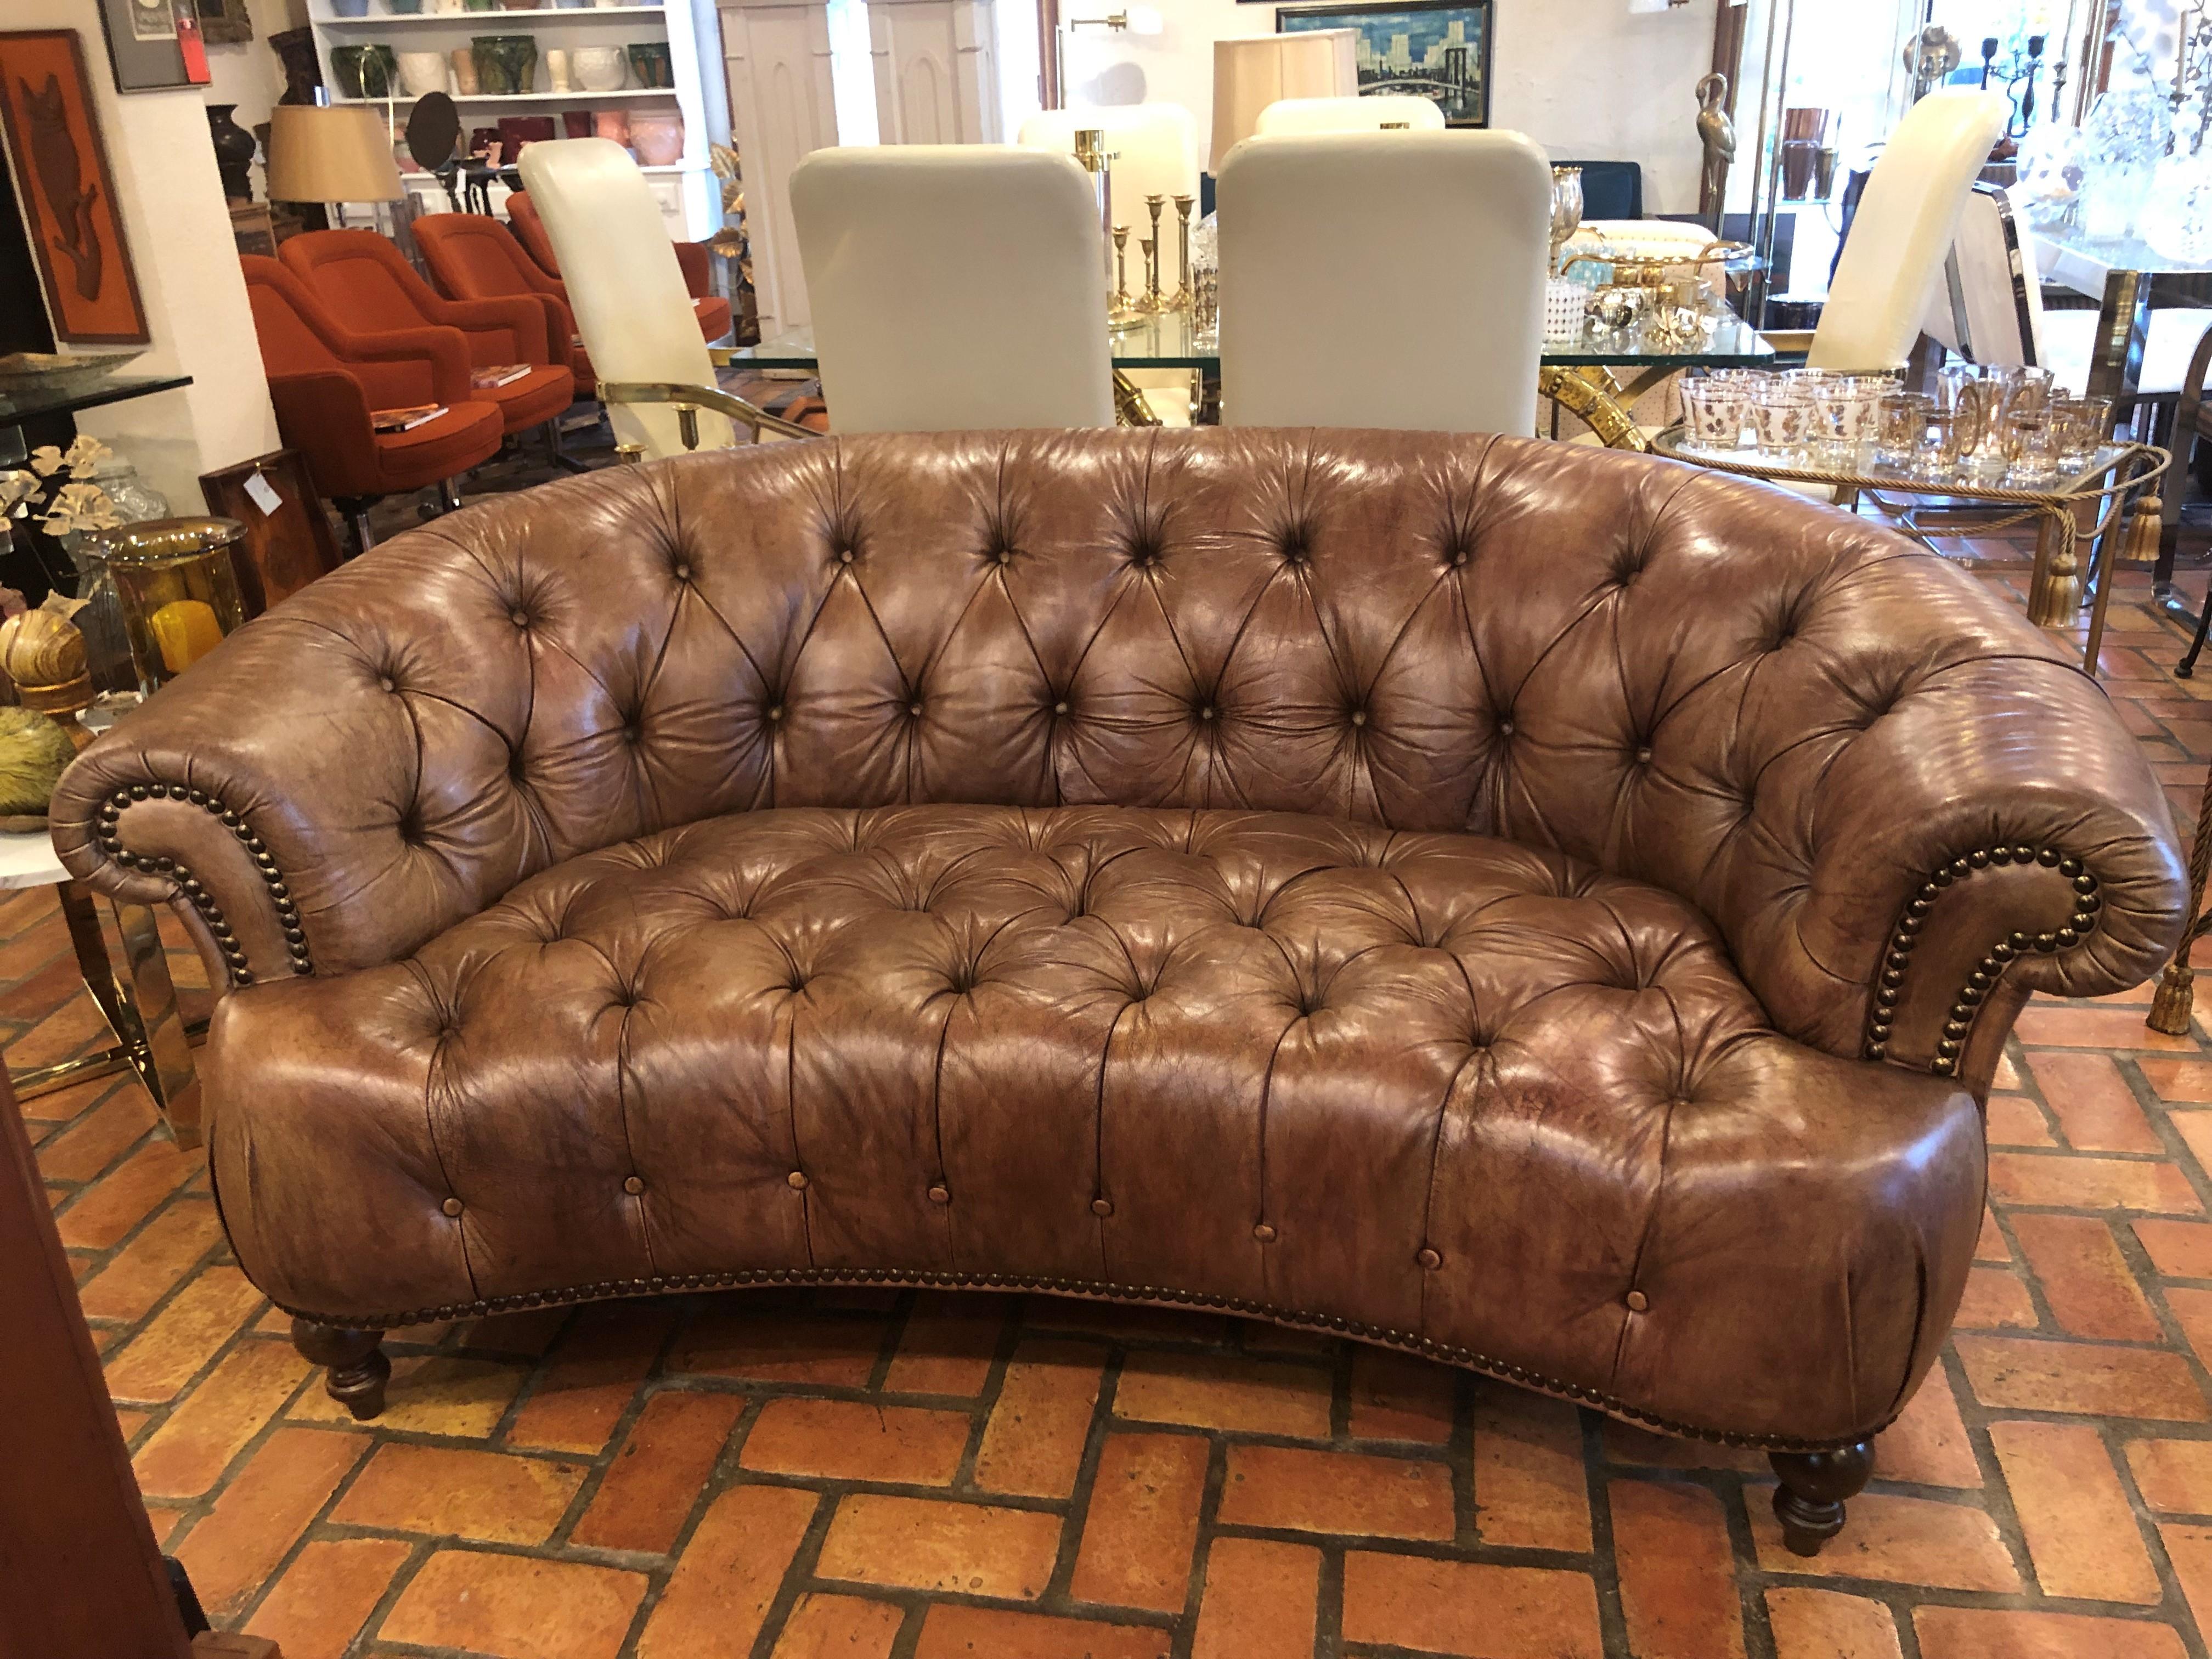 Curved lightbrown Italian leather chesterfield sofa. Sumptuous tufted button back curved sofa. The classic design for any living room or study. This delicious color and design is a staple for any traditional home. Fabulous weathered patina to this